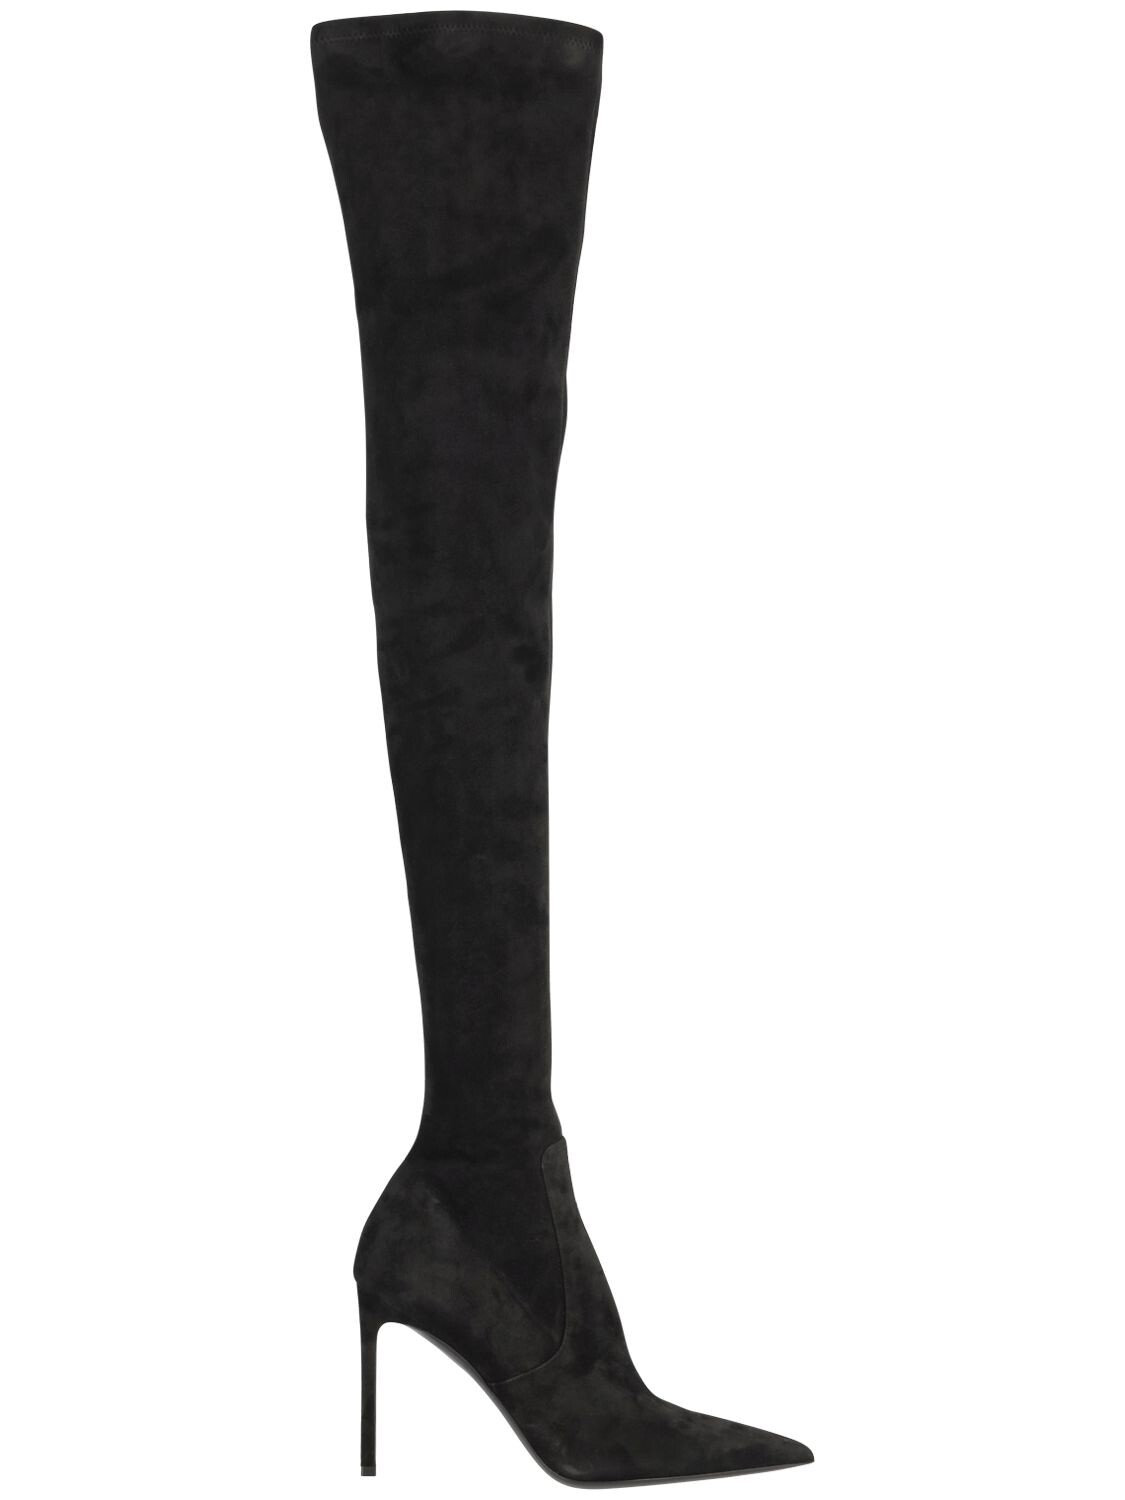 MICHAEL KORS COLLECTION 100mm Elle Leather Over-the-knee Boots in black